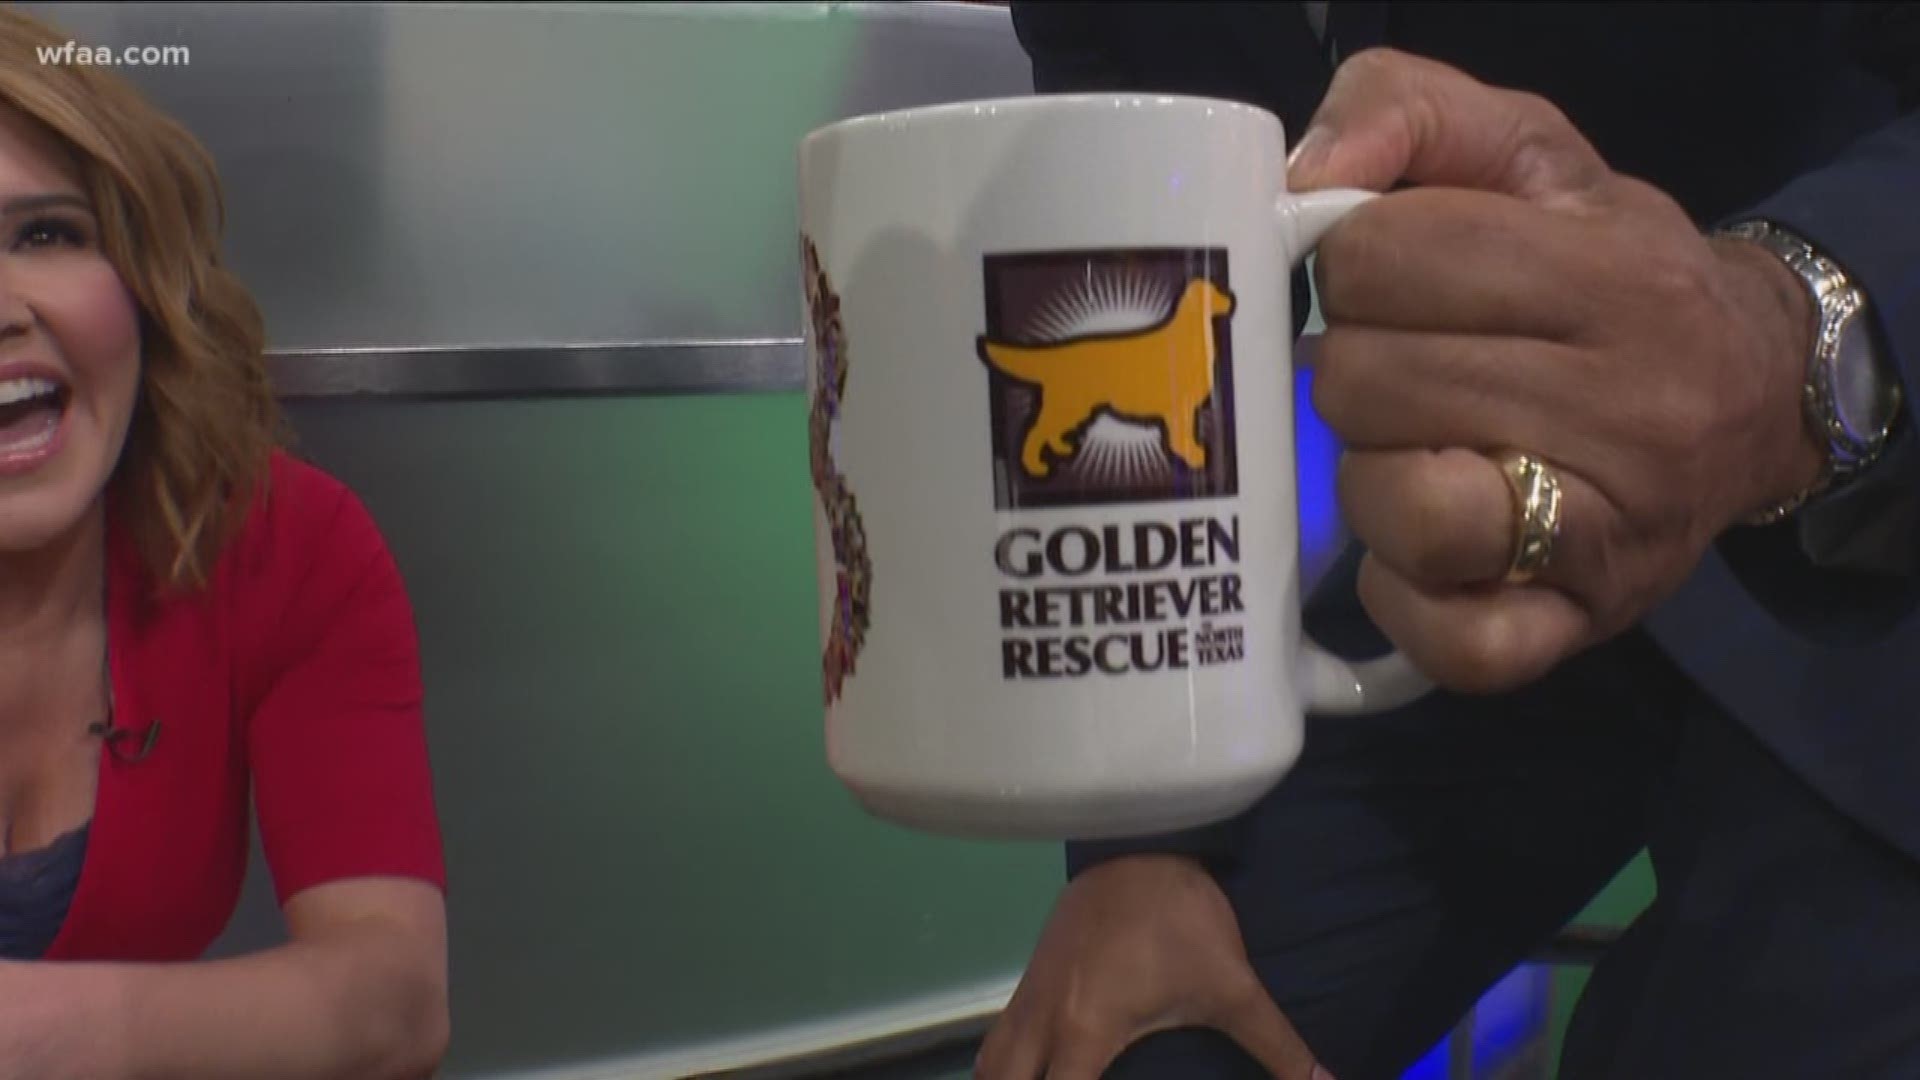 Every day leading up to North Texas Giving Day, Greg Fields is drinking from a mug featuring an area nonprofit raising funds on Sept. 19. Today's cup is from the Golden Retrieve Rescue of North Texas. The organization provides permanent homes for dogs.